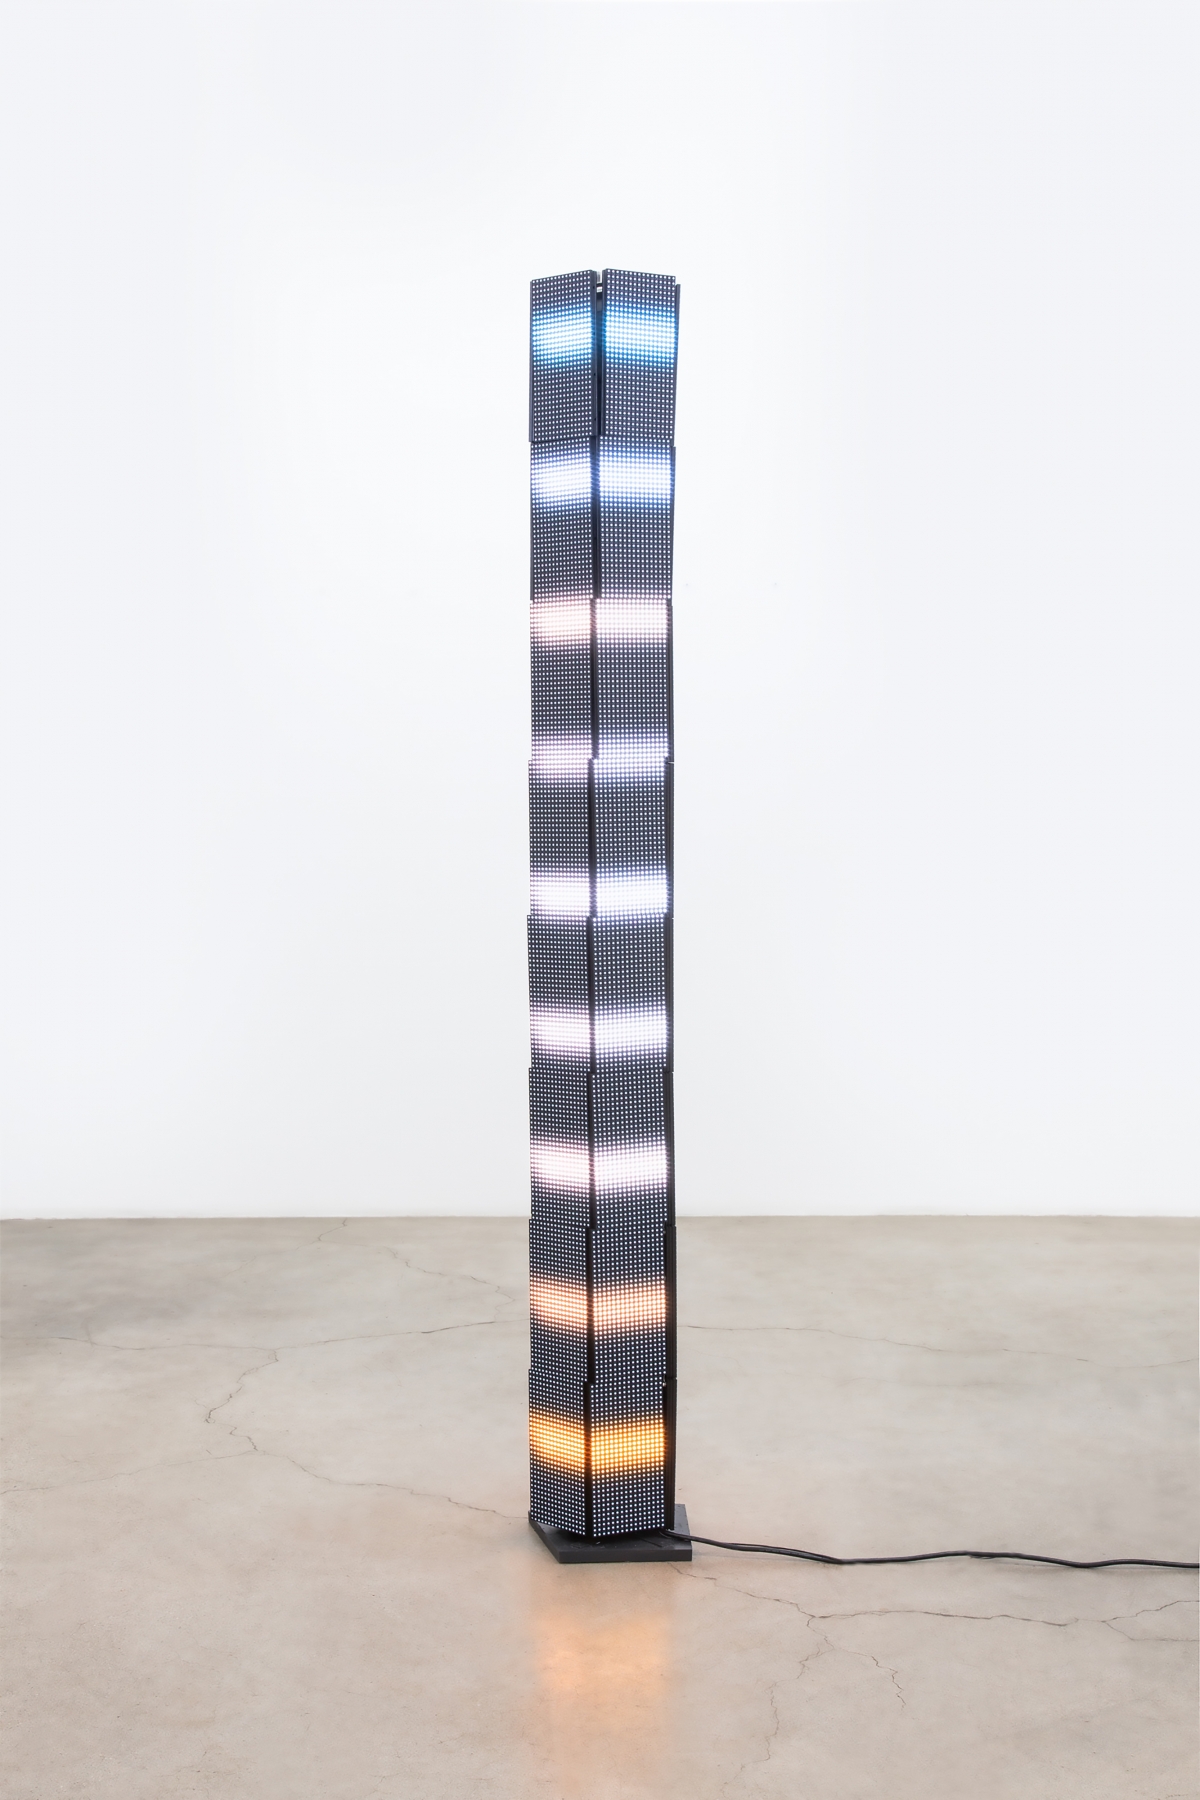 Luke Murphy, Lord Kelvin Column with 5 sides and 9 lights, 2020